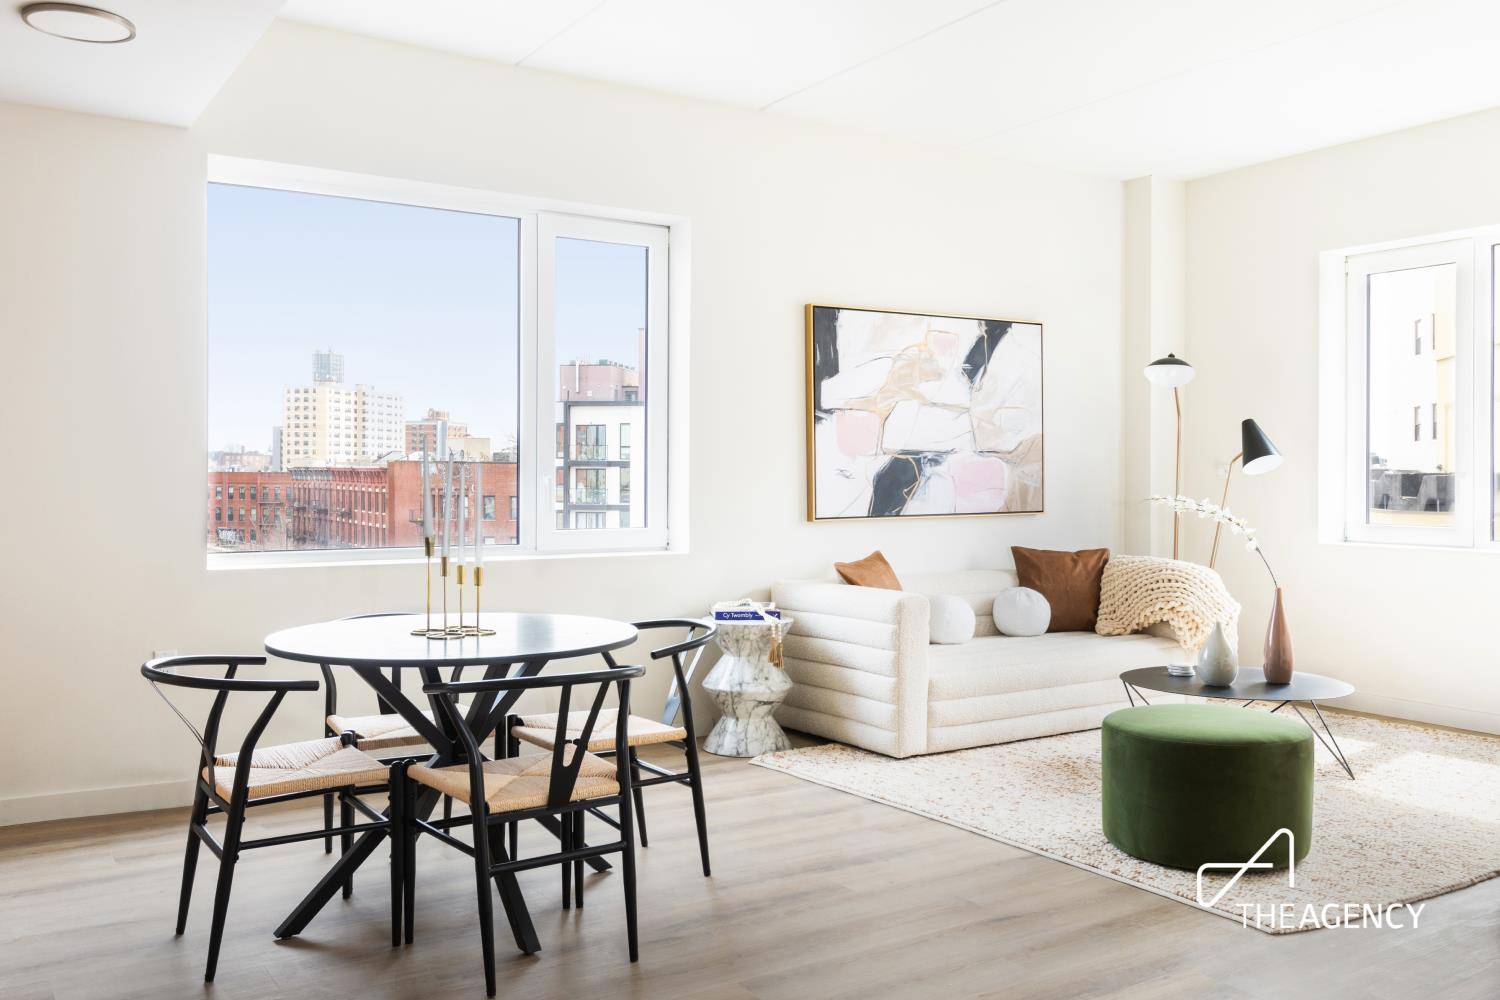 Unit 705 offers a 229 square foot private terrace.